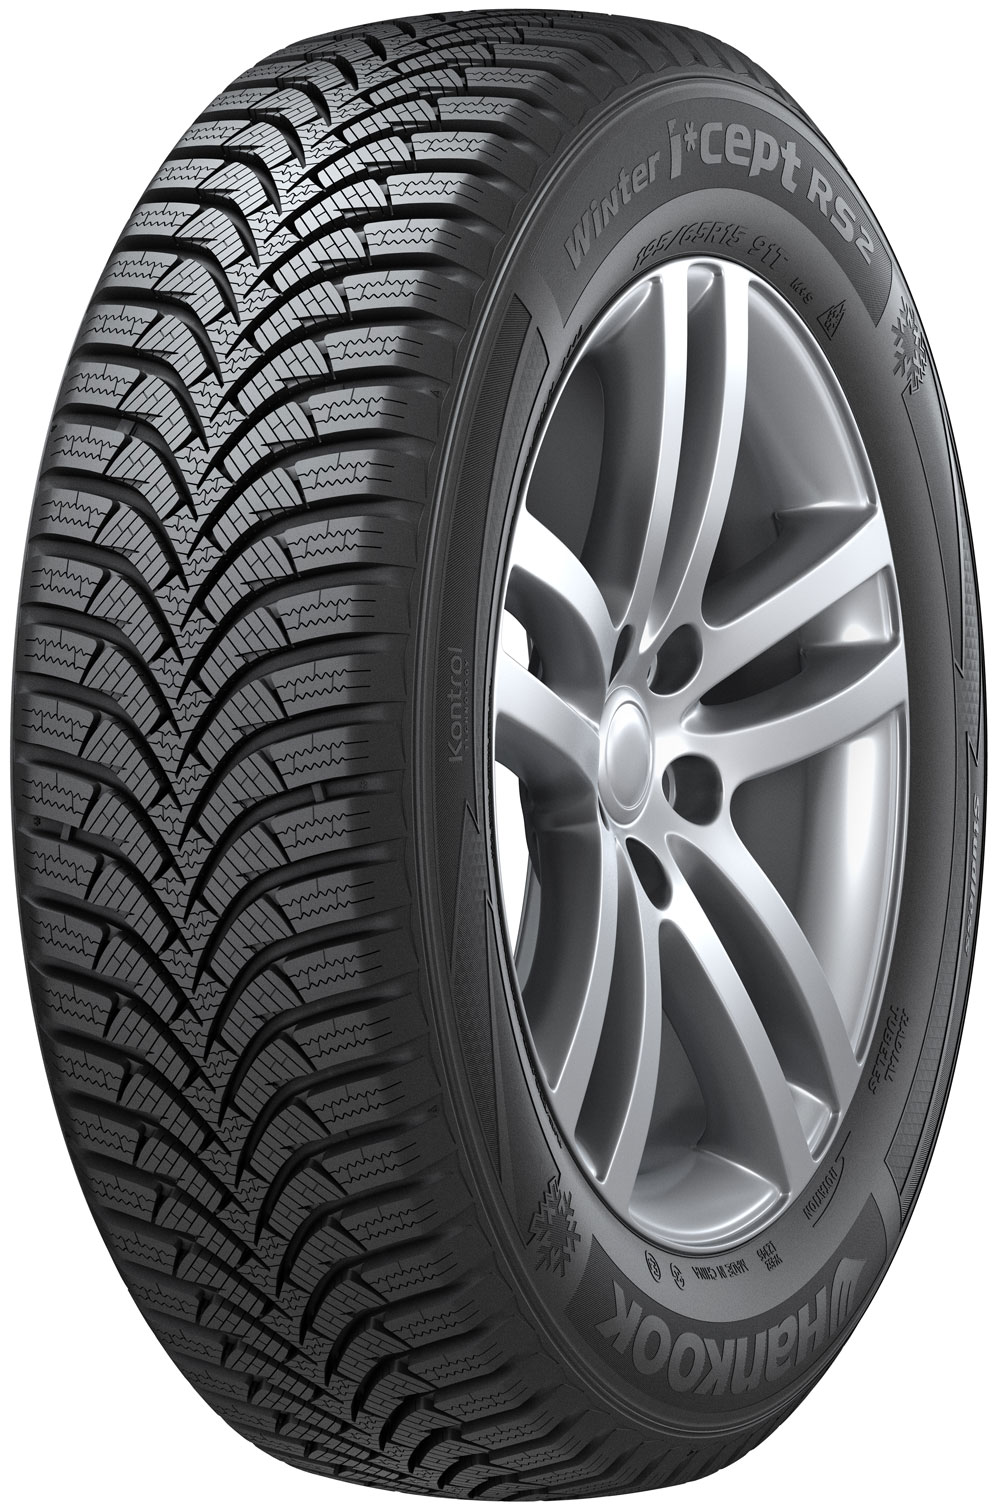 Anvelope auto HANKOOK Winter icept RS 2 (W452) 145/60 R13 66T